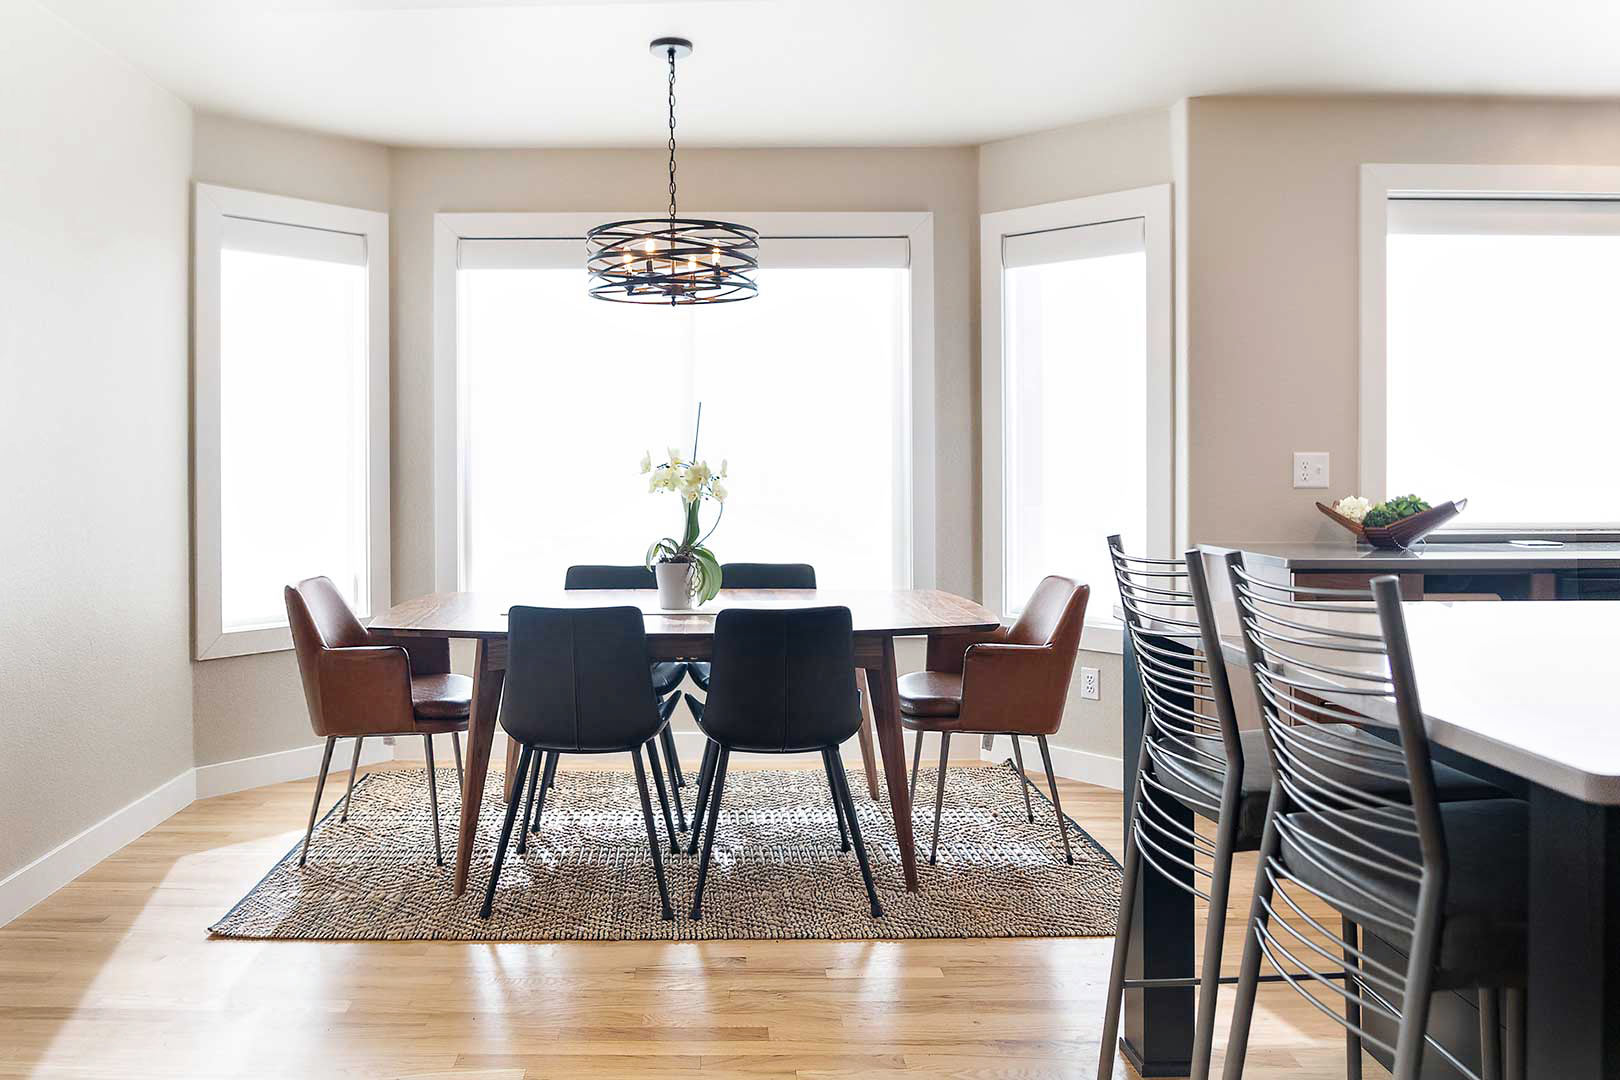 A 3-foot bump out which created ample room for a large dining table in the transitional farmhouse kitchen renovation.